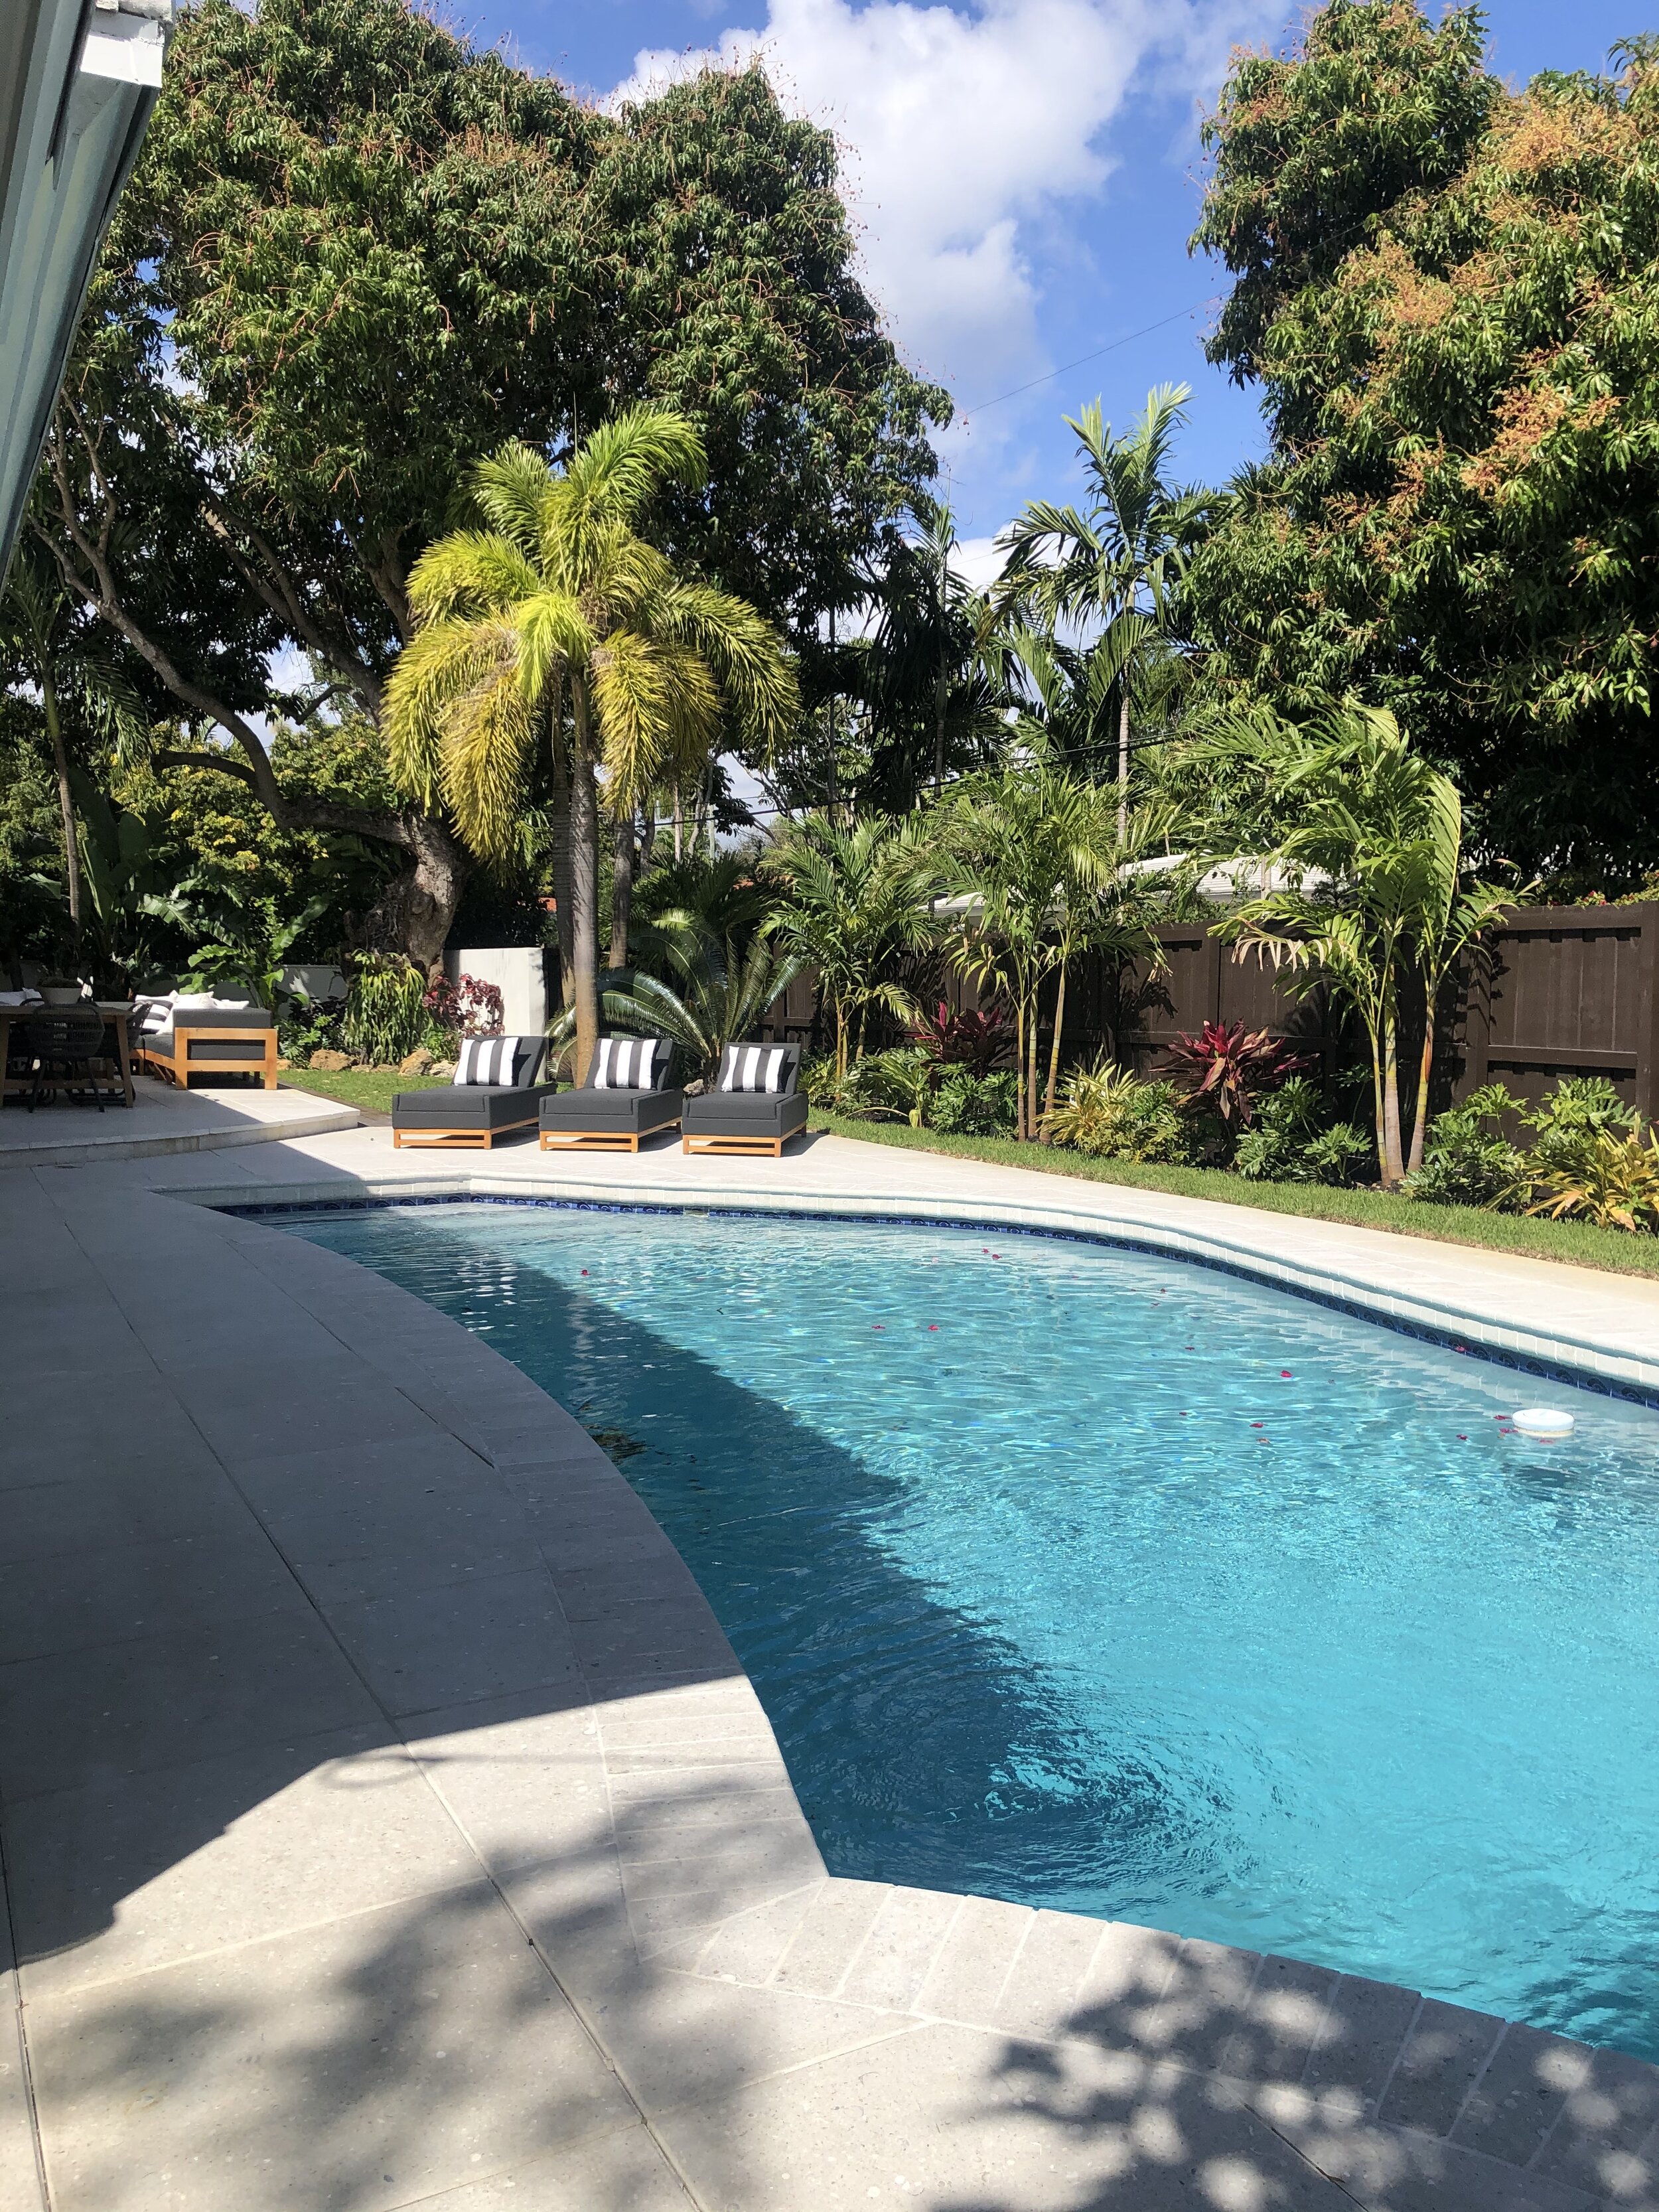 Backyard of a renovated pool home in Miami Shores, FL